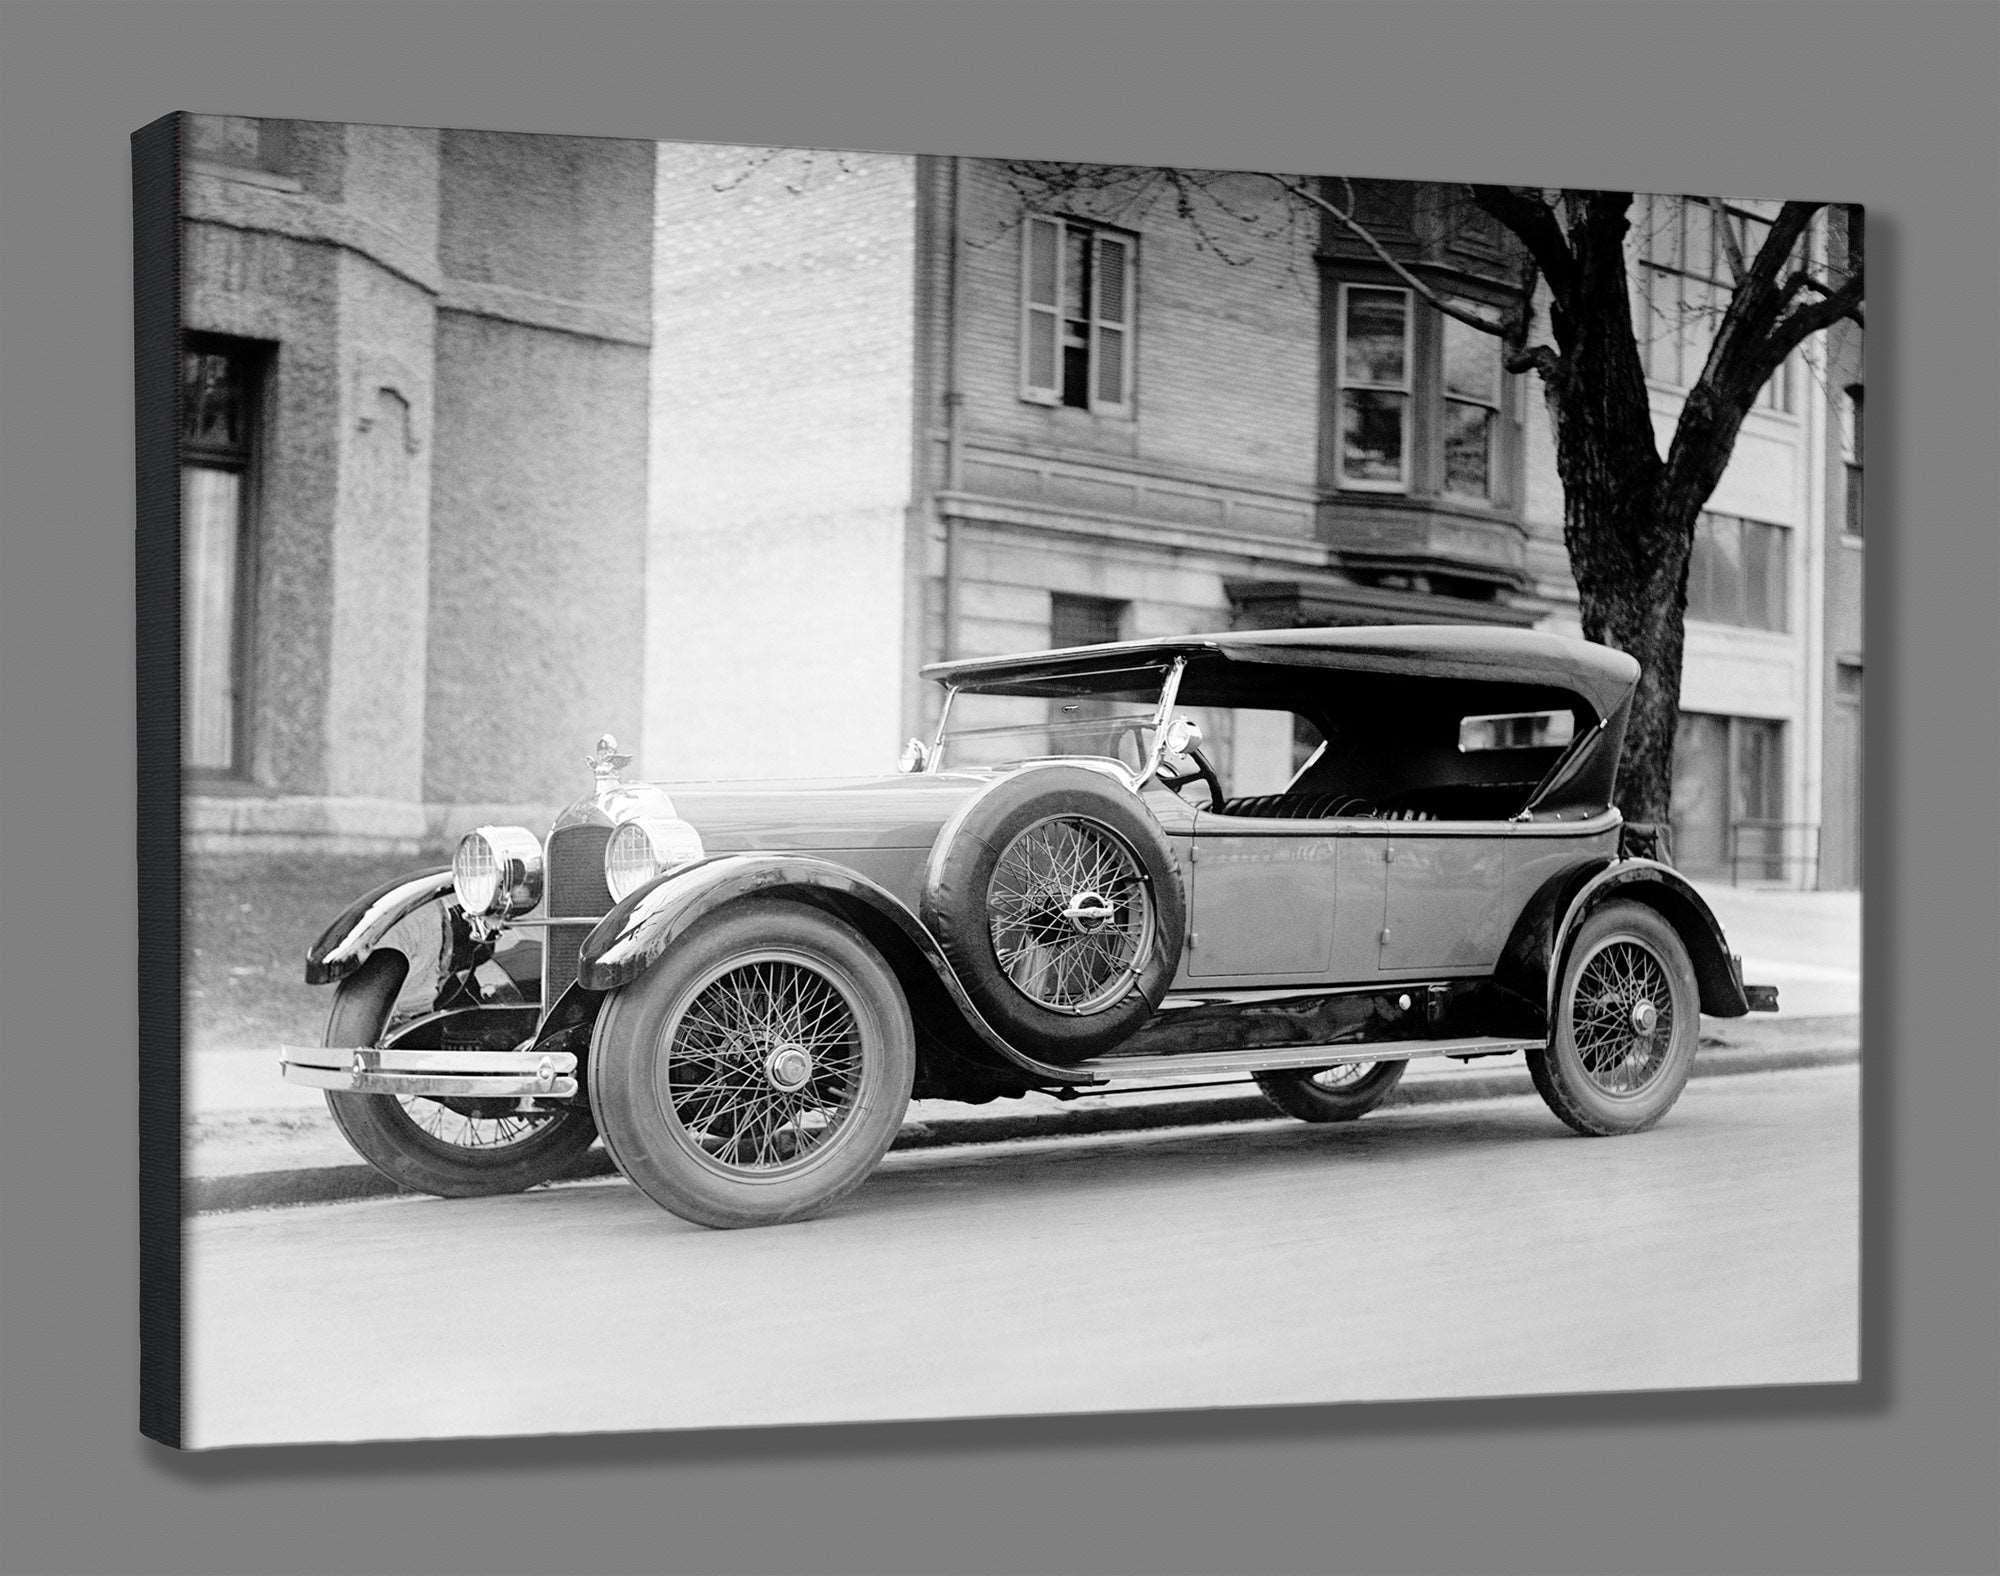 A canvas print of a vintage photograph of a Dusenberg Car parked on the street